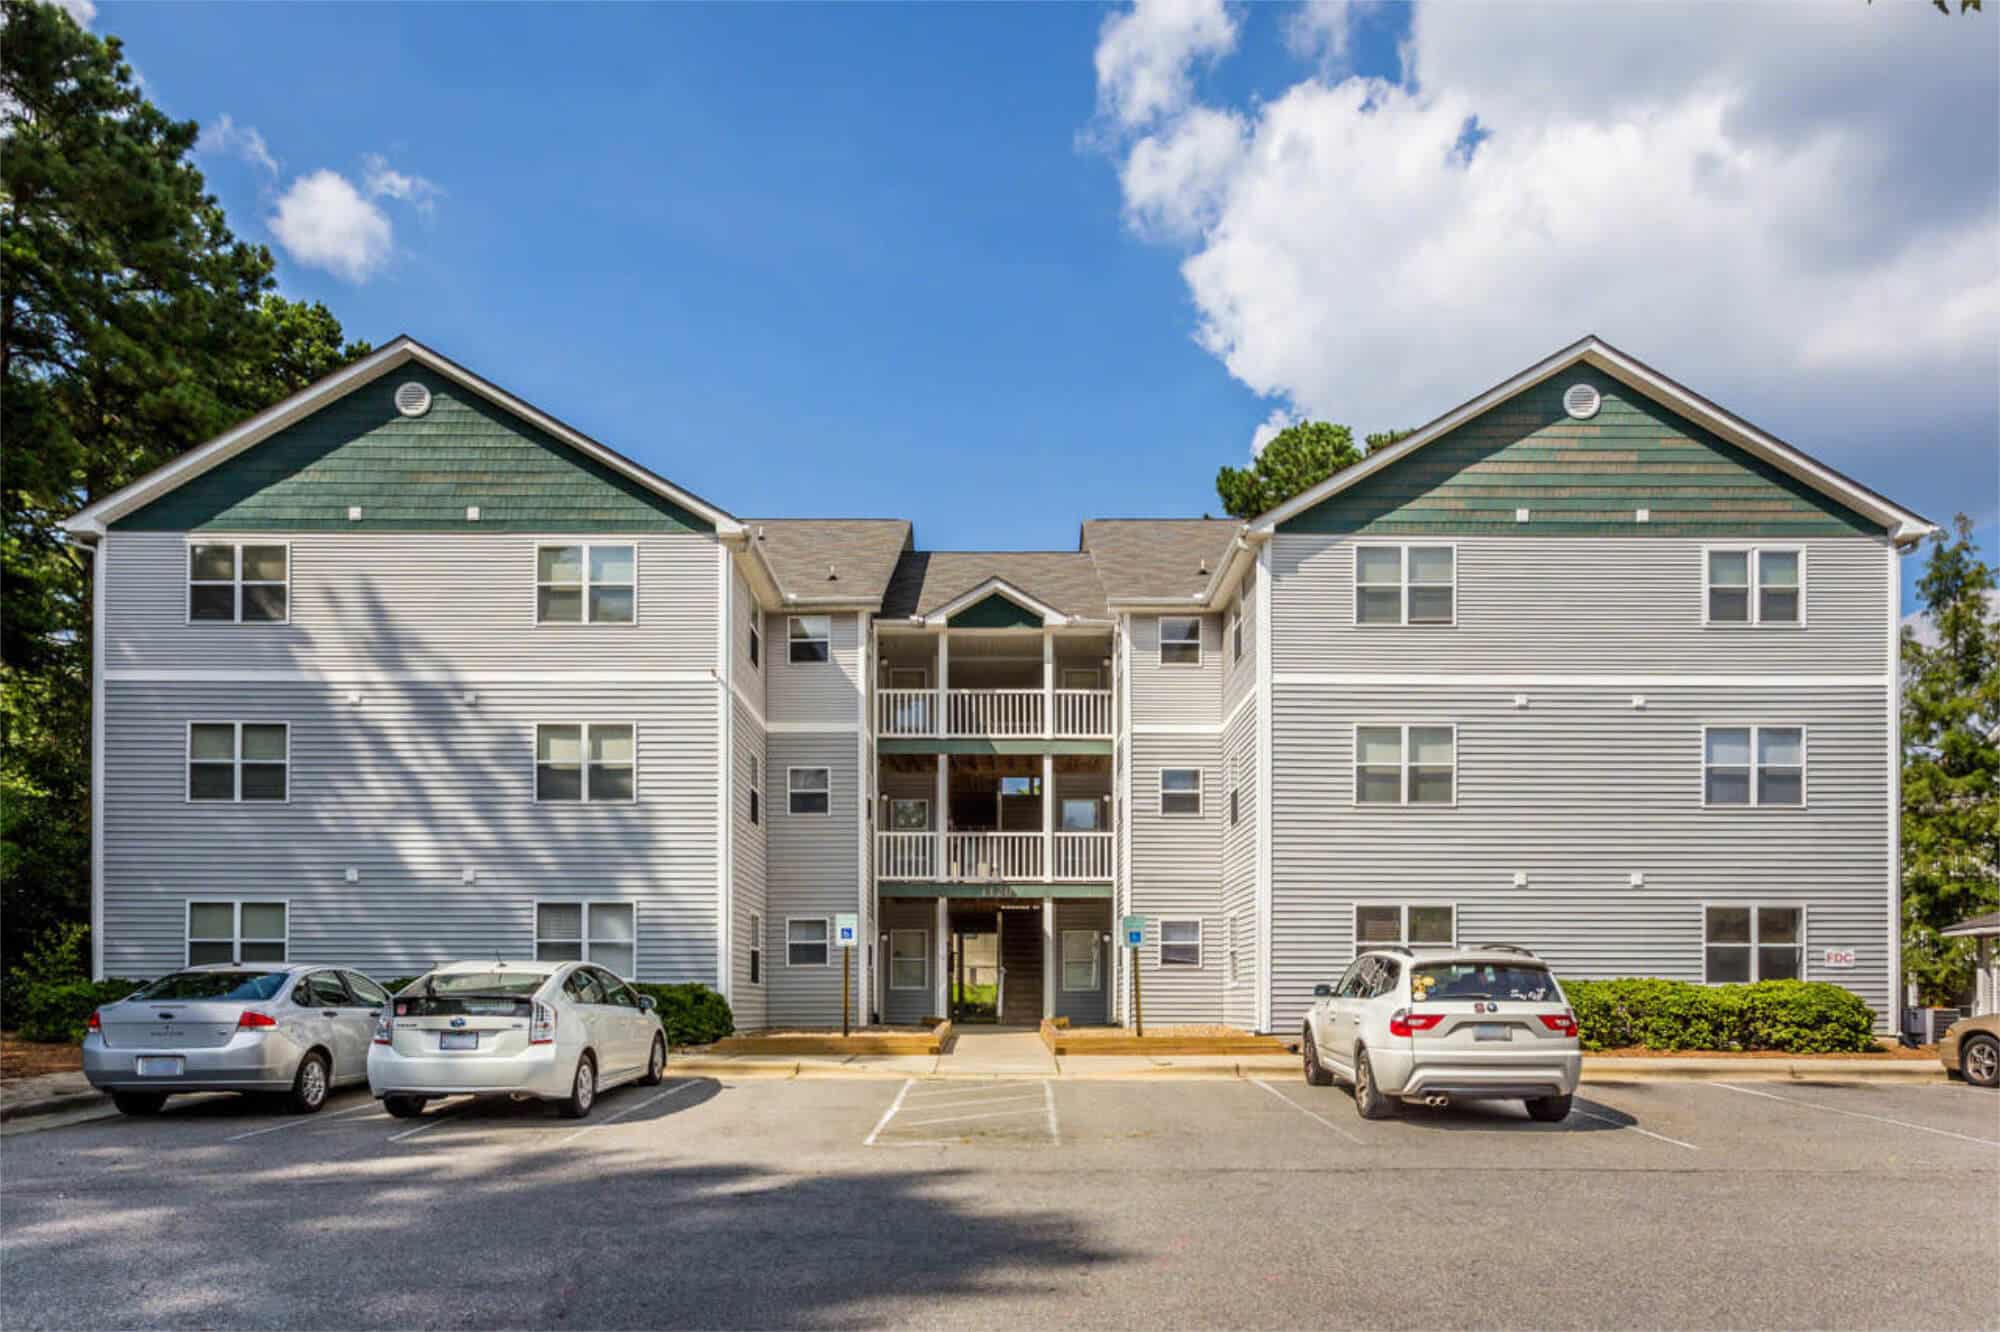 raleigh off campus apartments near nc state university building exterior